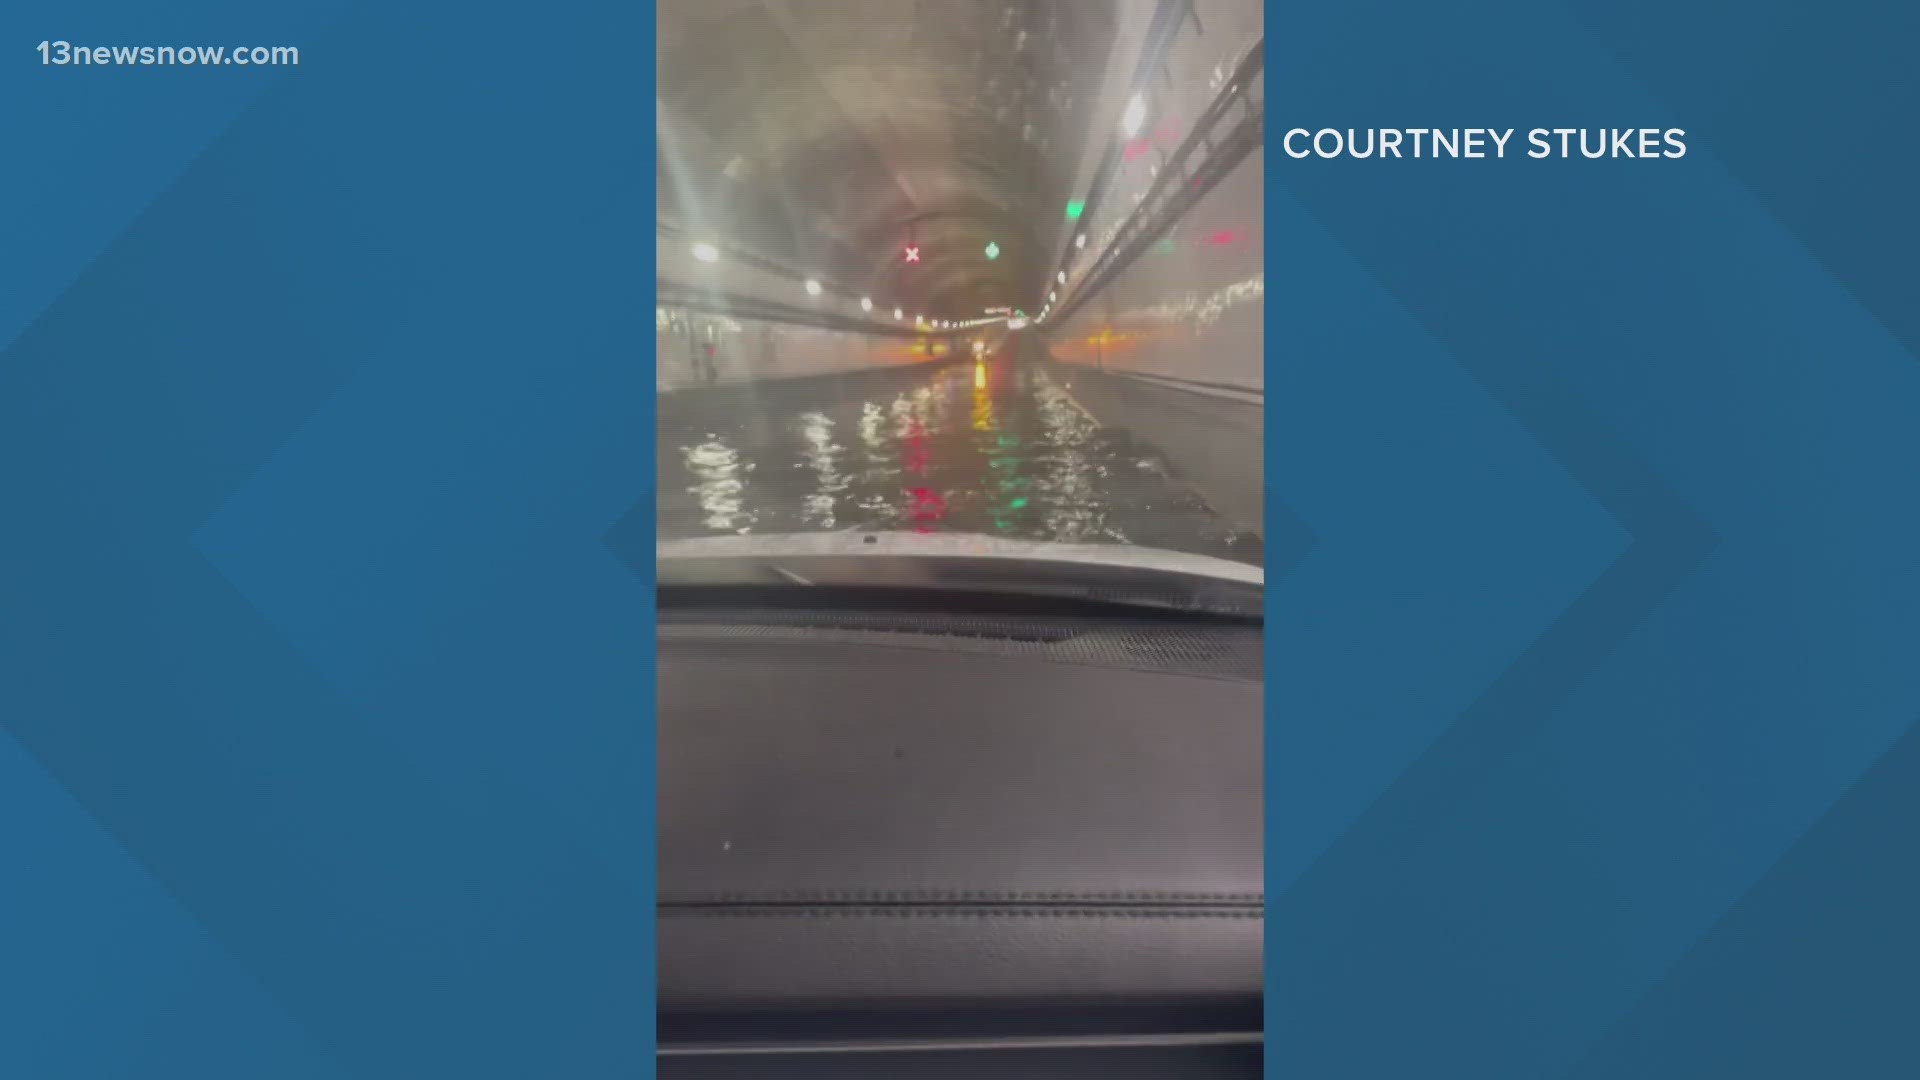 Pumps for the eastbound Downtown Tunnel weren't functioning due to a power surge. The tunnels were fully closed for over an hour due to safety concerns.